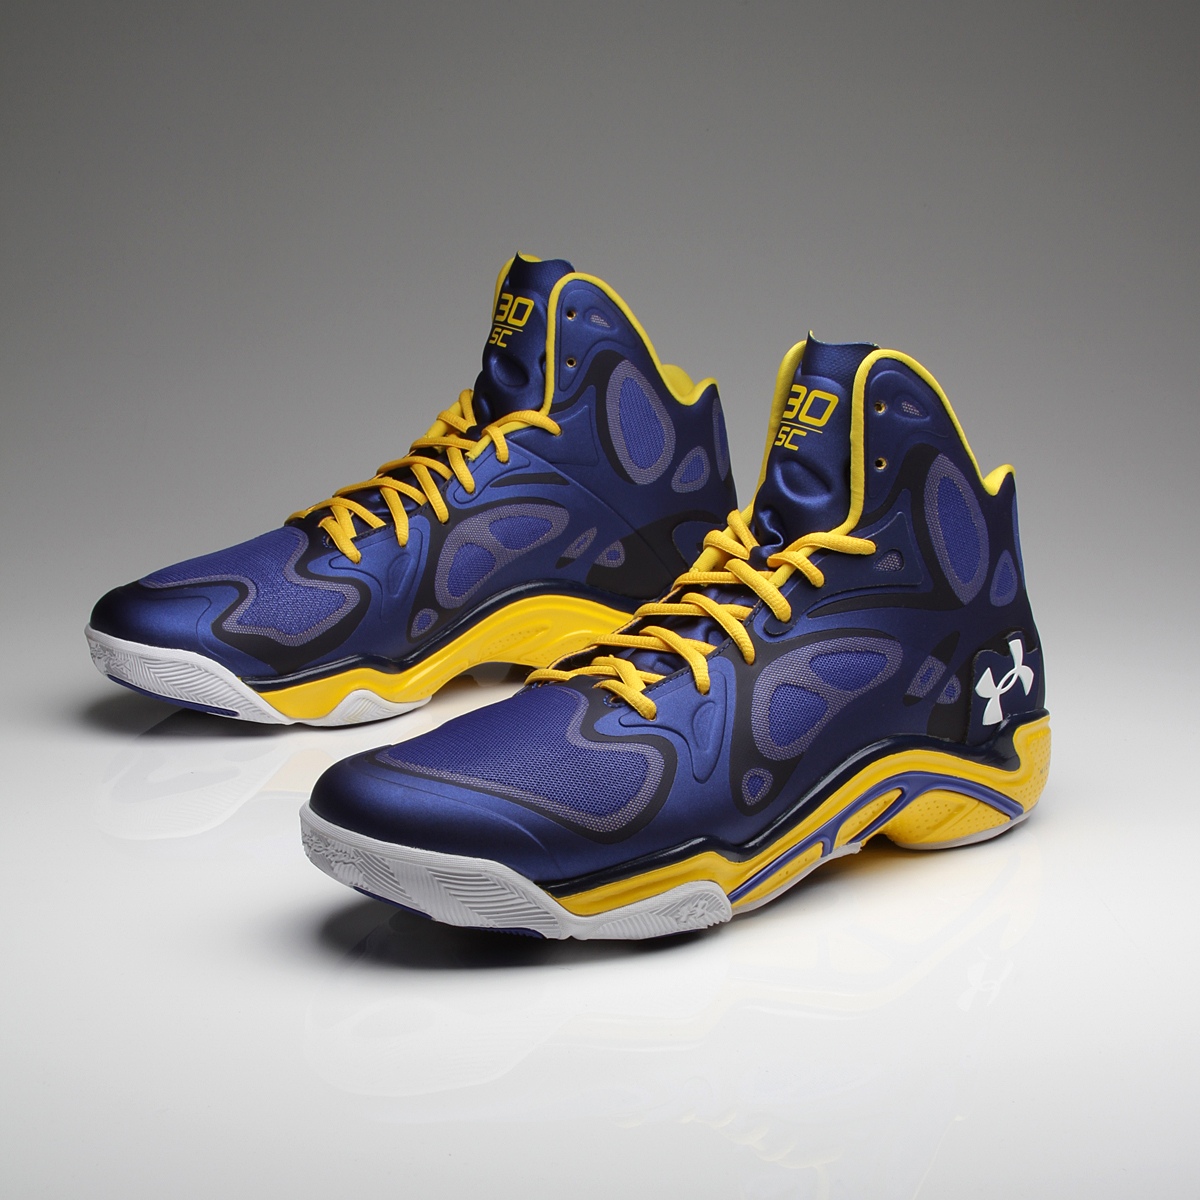 Under Armour Debuts Royal Blue Stephen Curry Shoe